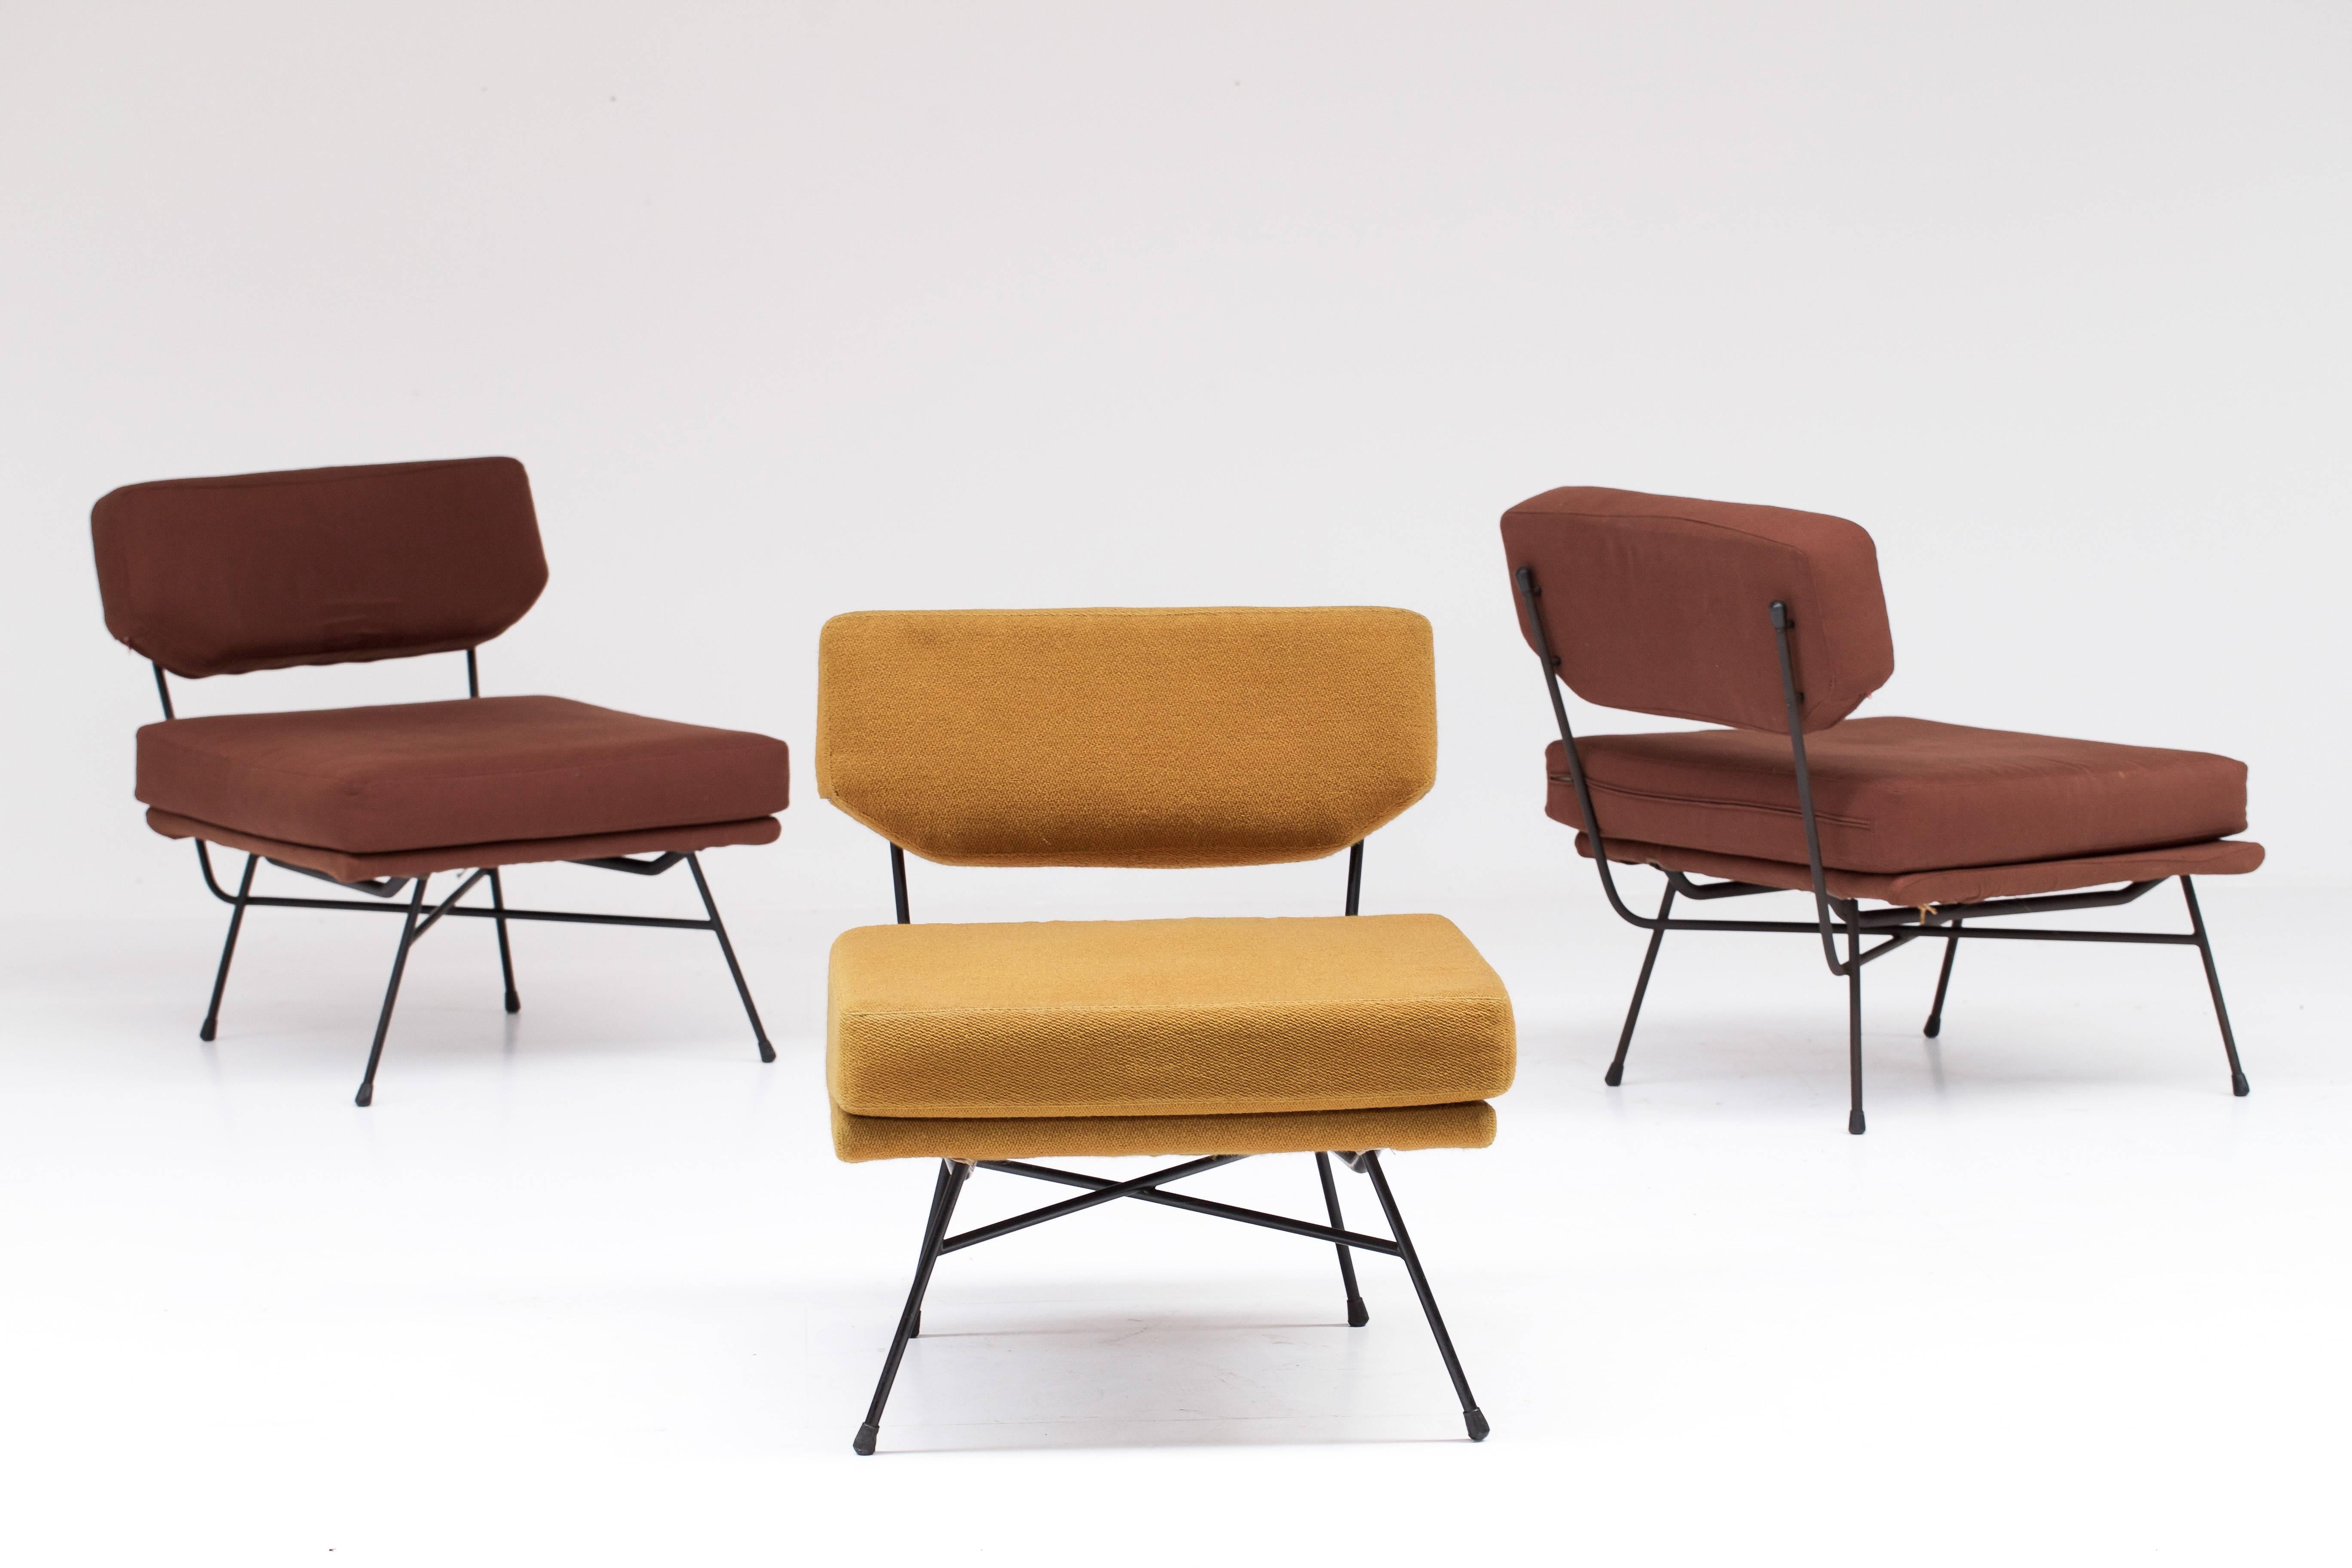 Four Elettra lounge chairs for Arflex, one still in original yellow upholstery with label. 3 brown reupholstered lounge chairs, of which 1 still has the original label.
These hard to find Studio BBPR lounge chairs come from a residence in Bologna.